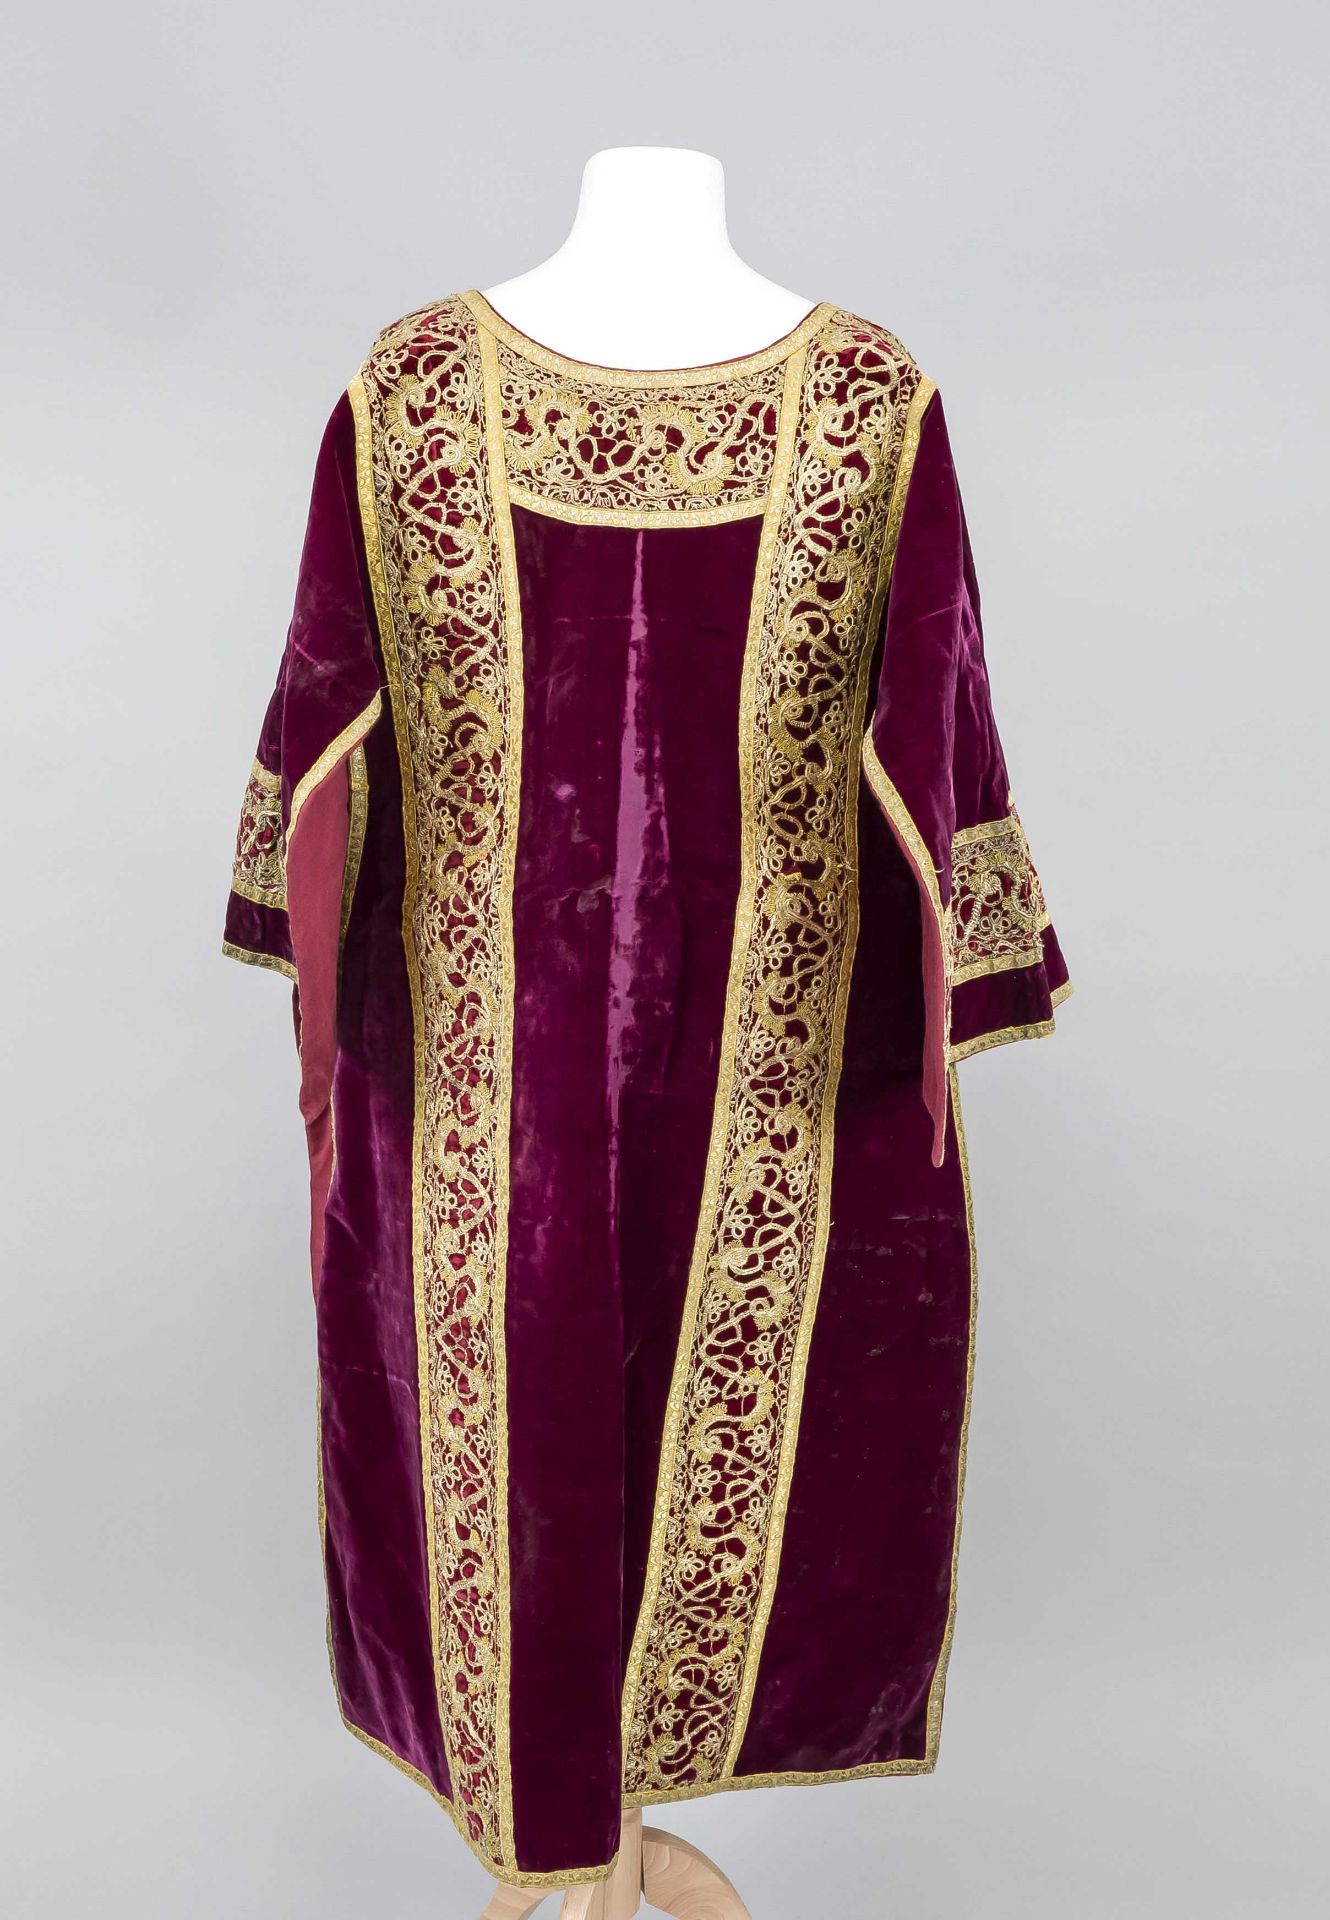 Lithurgical vestment for the Roman Catholic rite (chasuble), probably 19th century, dark wine-red - Image 2 of 2